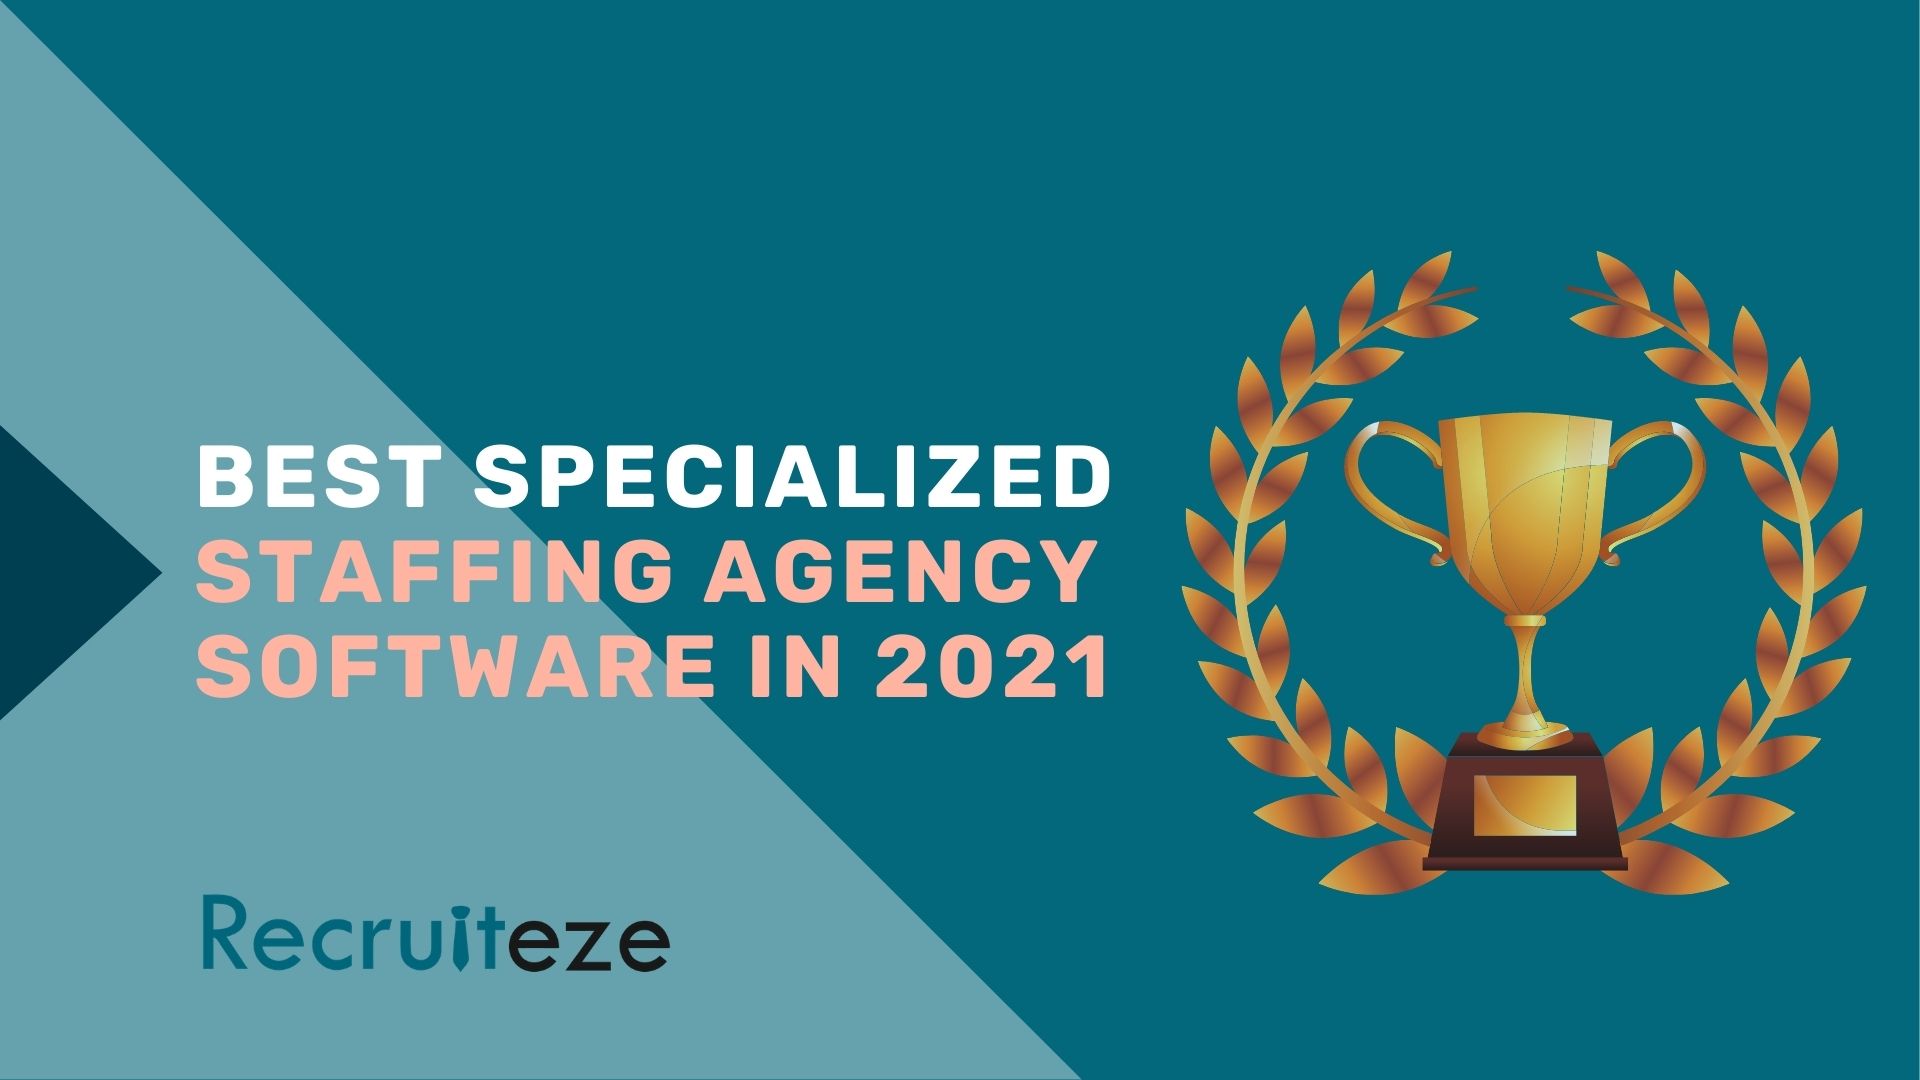 best specialized staffing agency software in 2021